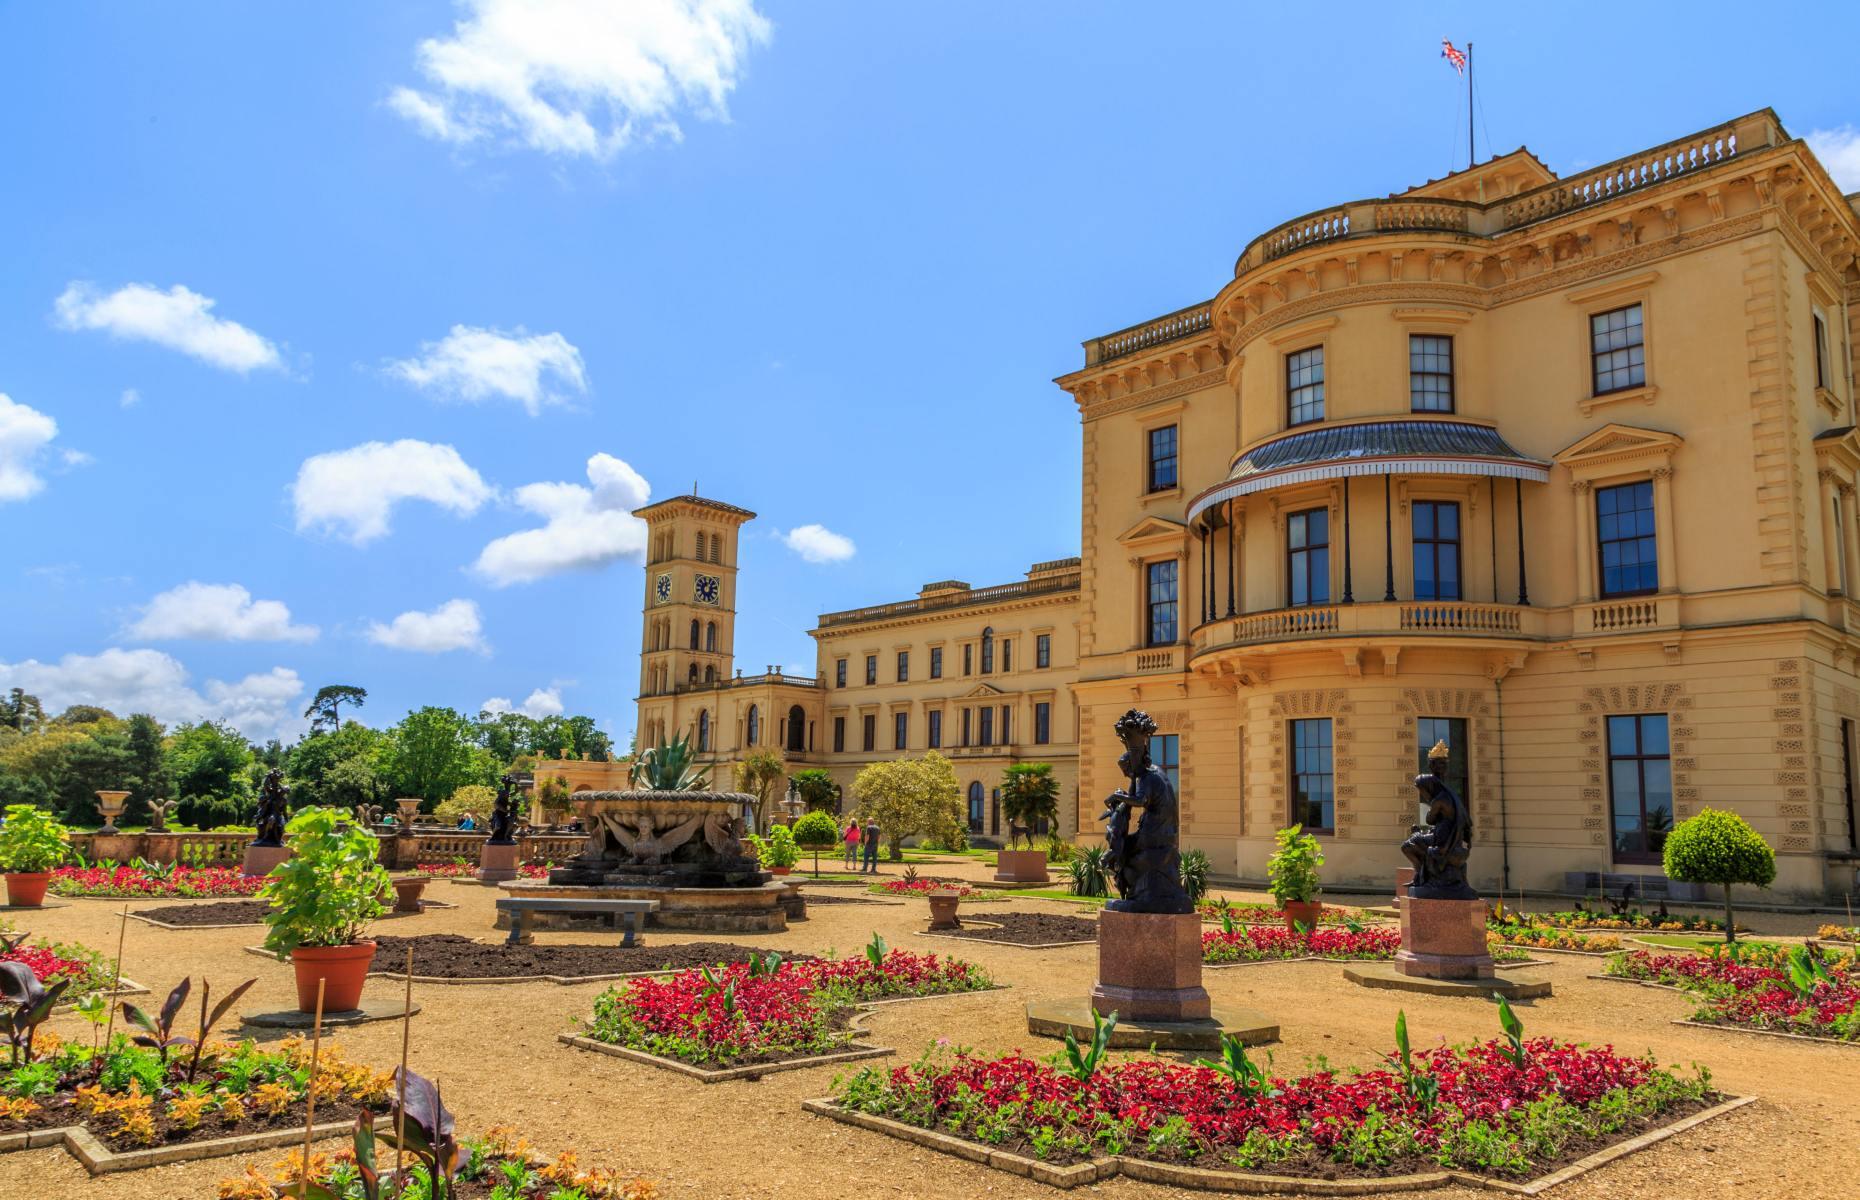 <p><a href="https://www.english-heritage.org.uk/visit/places/osborne/">Osborne House</a> at Cowes on the Isle of Wight was Queen Victoria’s favorite residence and where she brought up her nine children. She commissioned fashionable architect Thomas Cubitt to redesign the estate and turn it into an Italianate palazzo.</p>  <p>Once completed, it boasted its own private beach, gardens, and a full-sized Alpine playhouse called Swiss Cottage. “It is impossible to imagine a prettier spot,” she said of her beloved family home.</p>